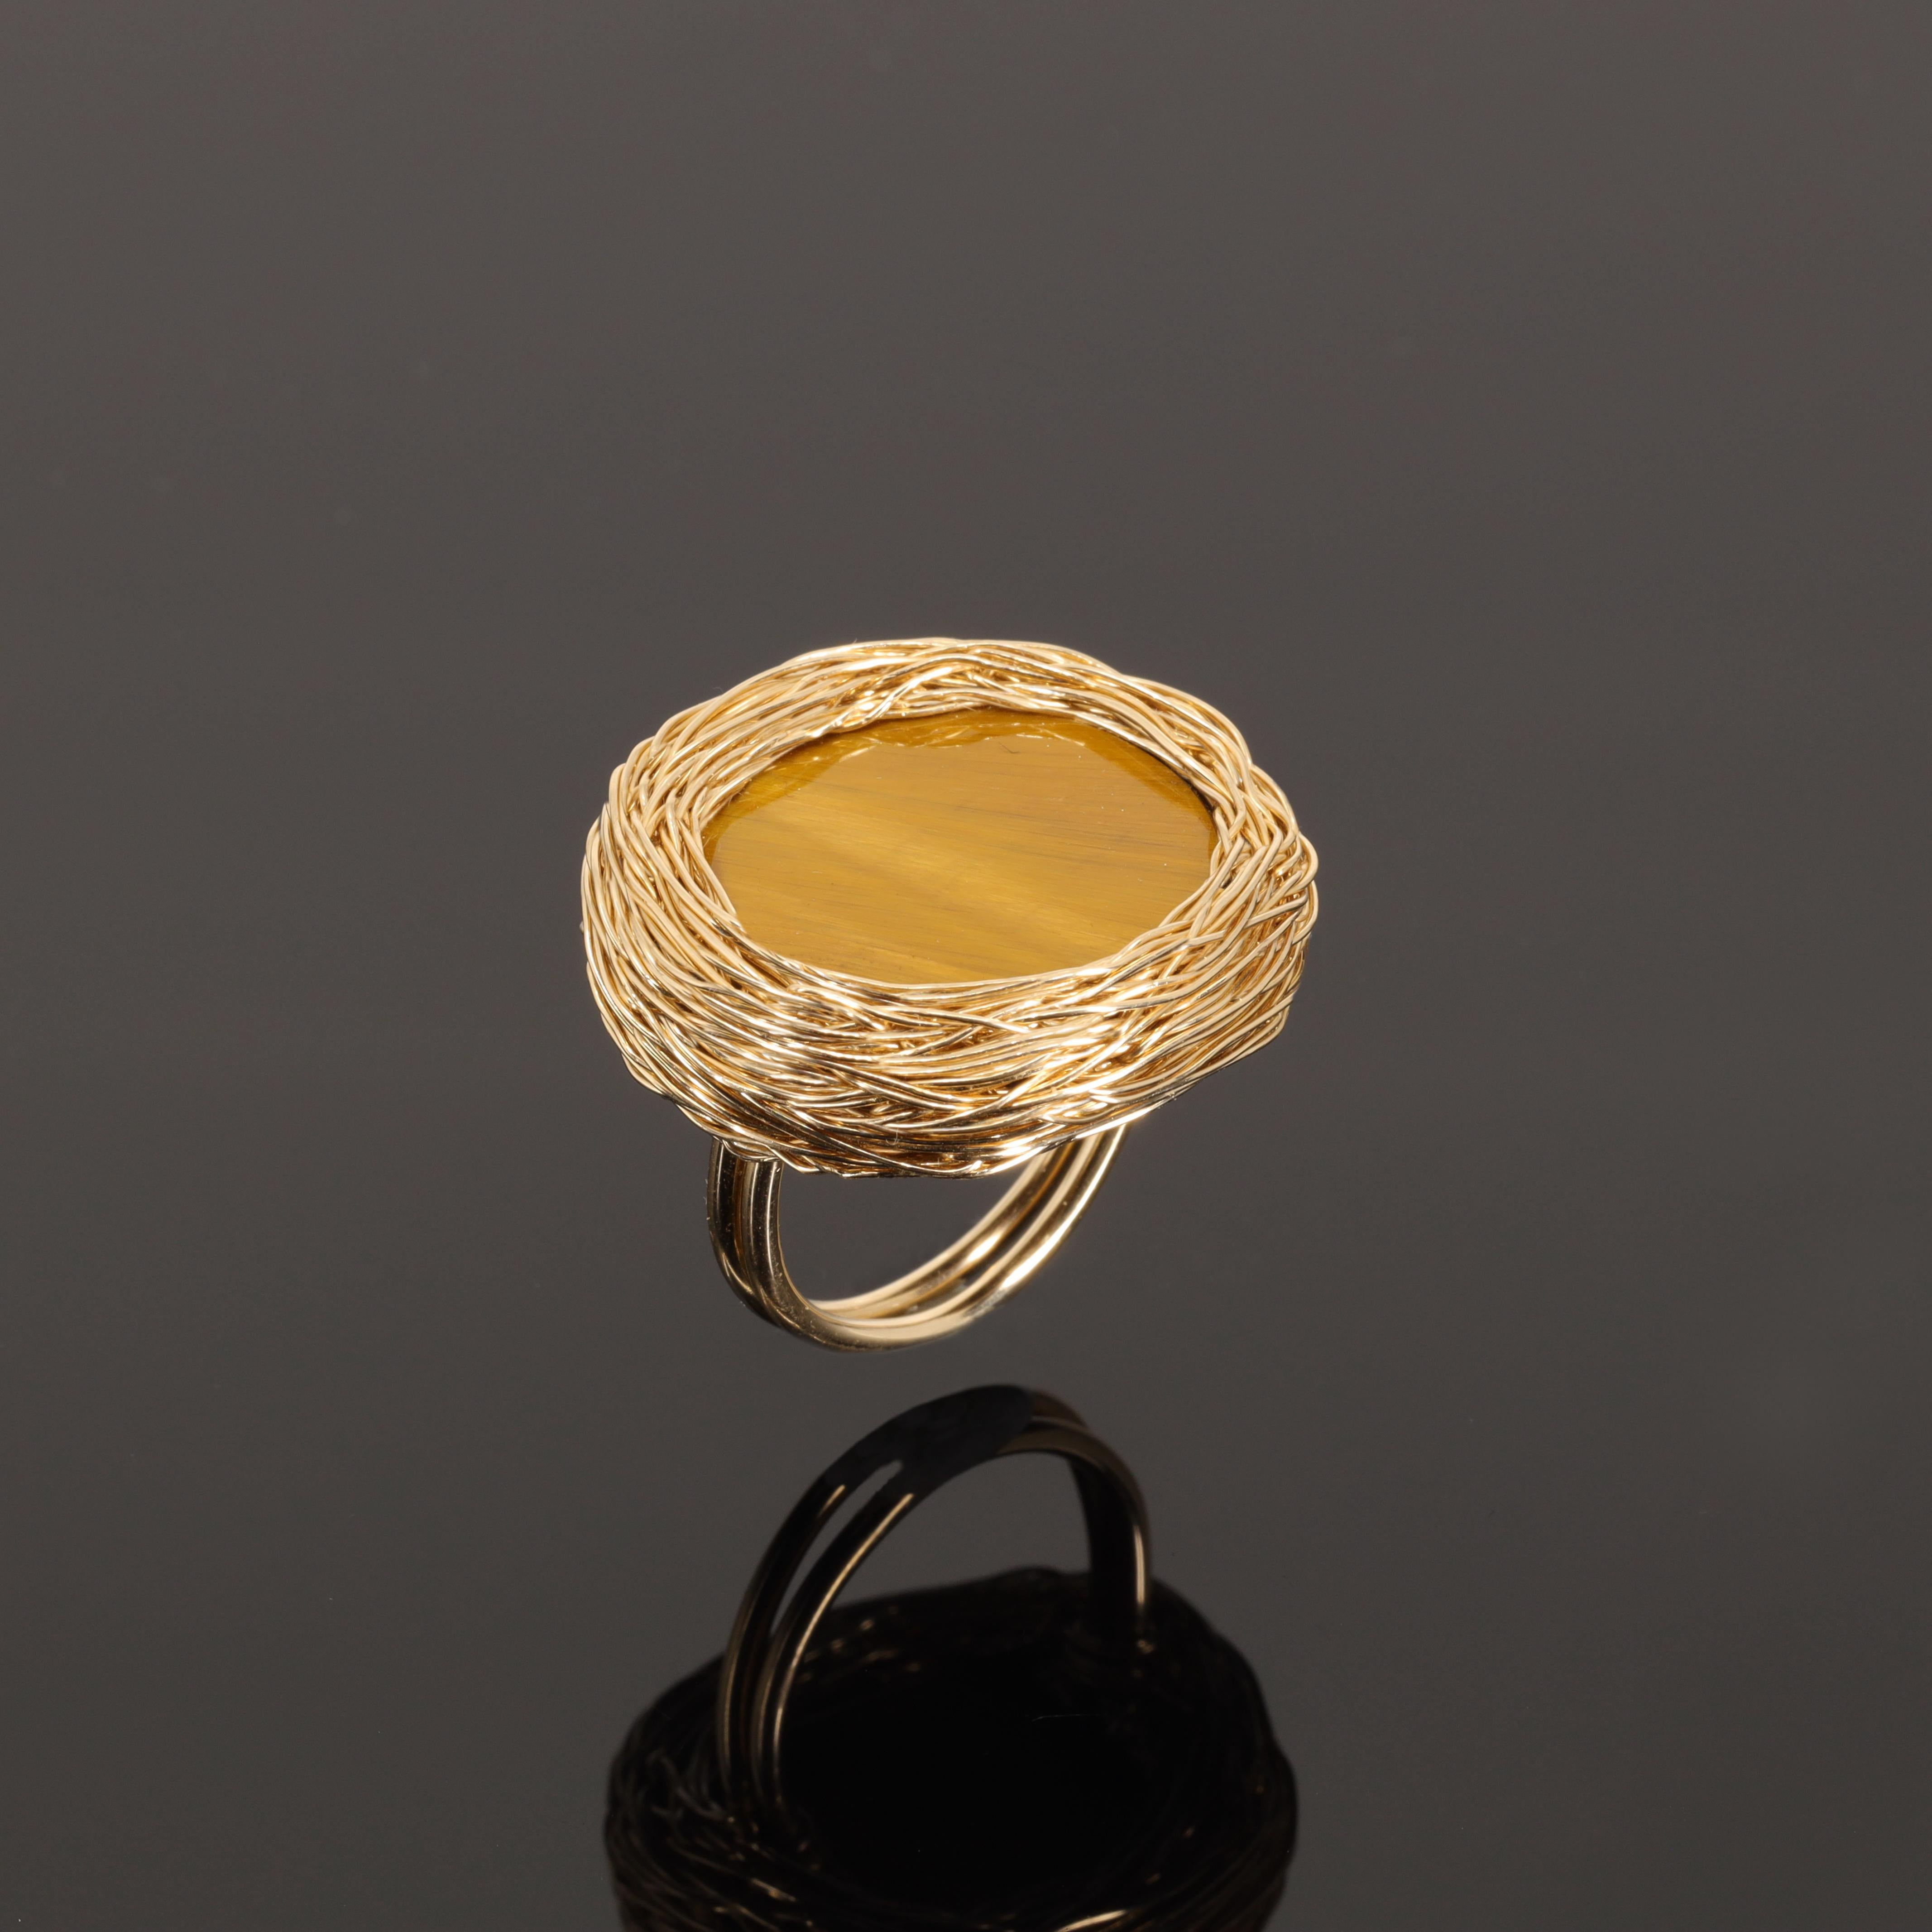 Contemporary Golden Tiger Eye Stone Stone Ring in 14 Karat Gold Filled Ring by the Artist